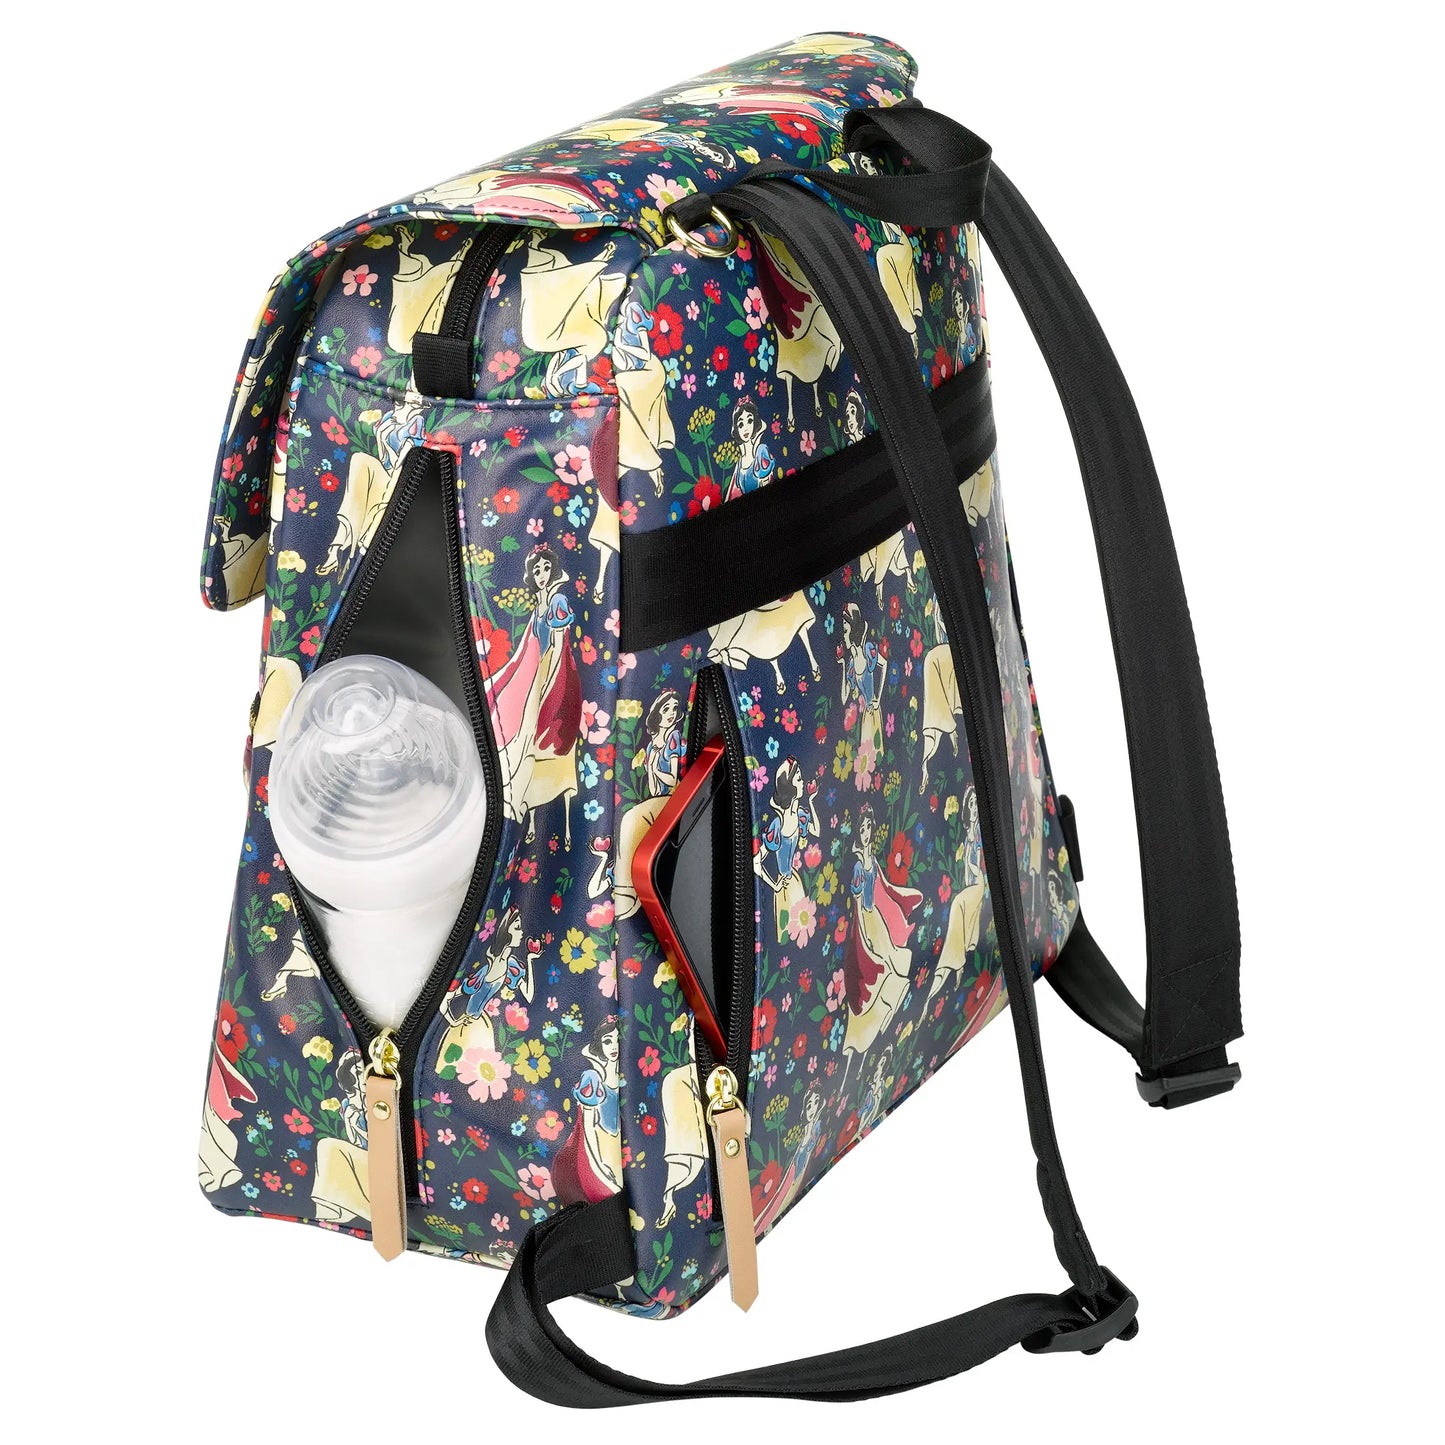 Petunia Pickle Bottom Meta Backpack Disney Snow White's Enchanted Forest